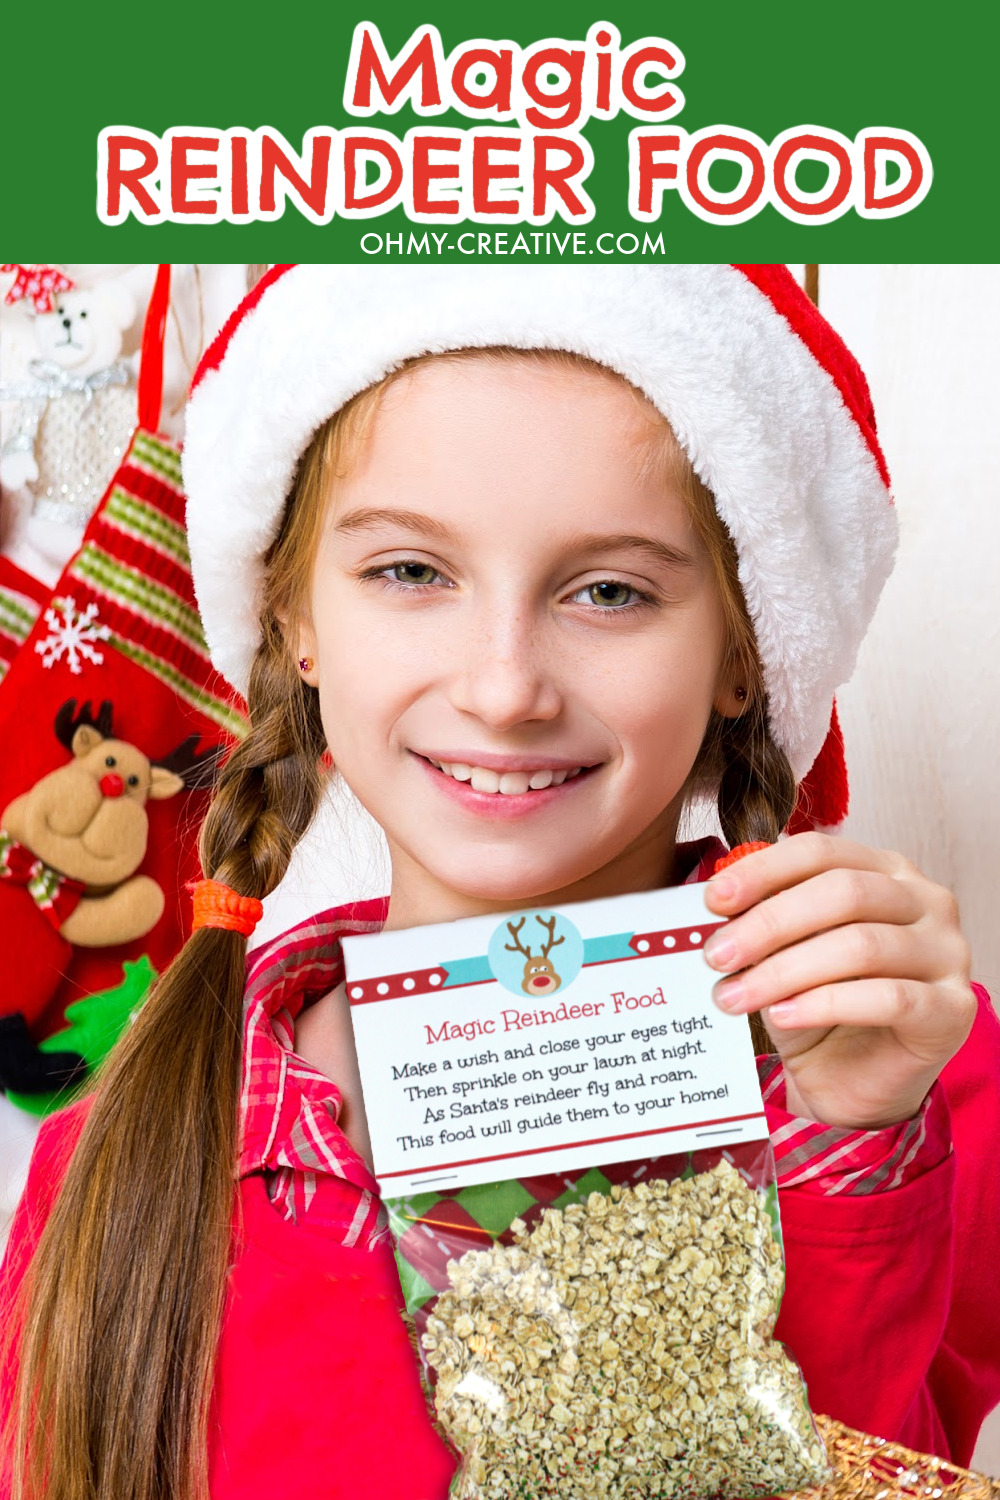 A girl dressed red and a Santa hat holding up a bag of Magic Reindeer Food